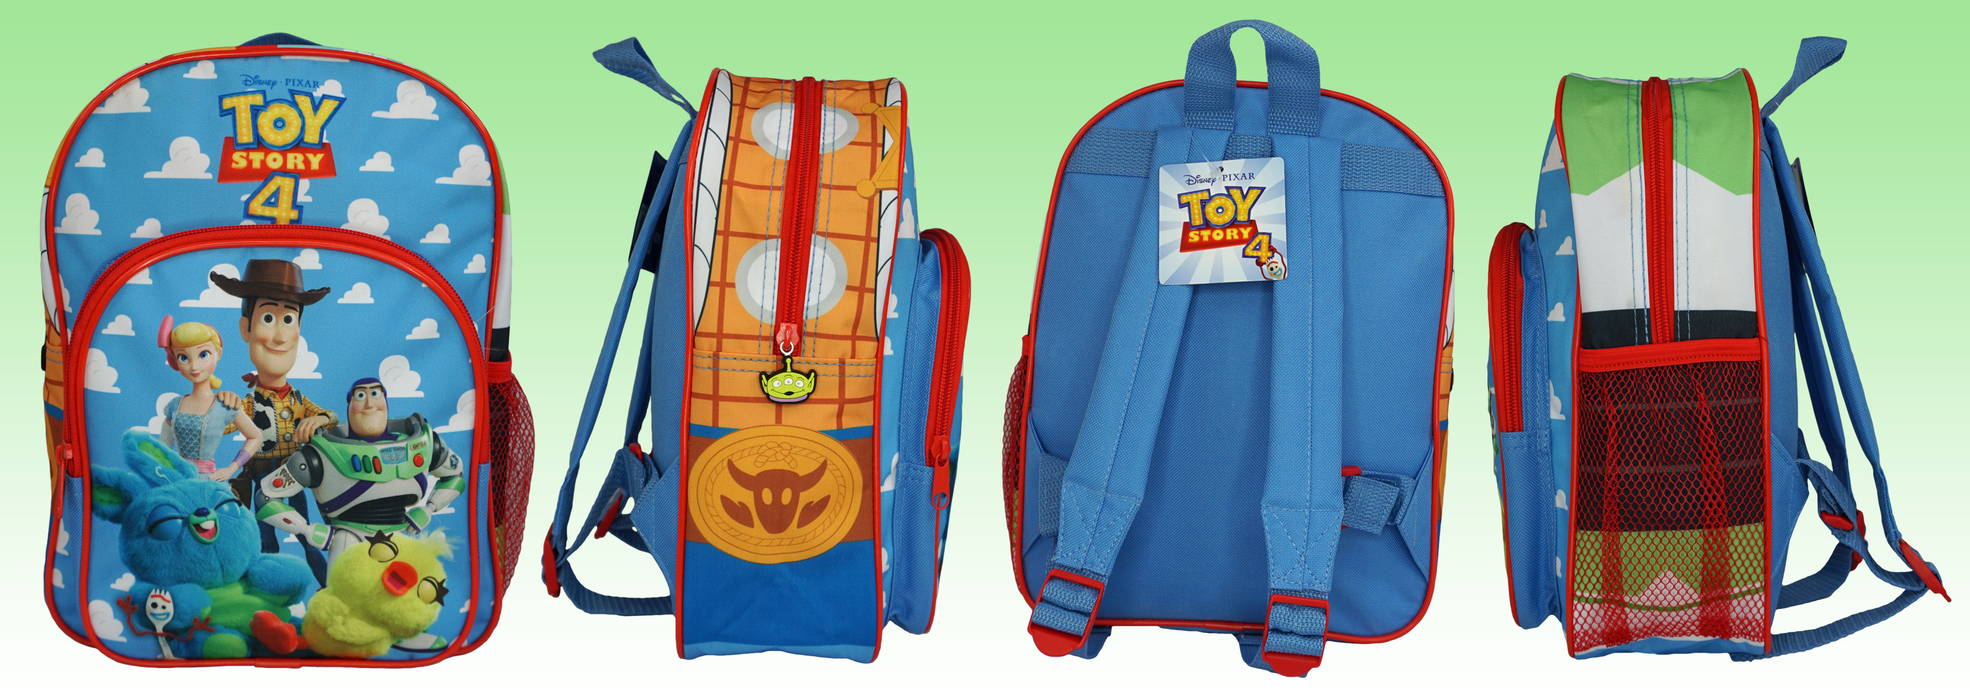 Toy Story Buddy Backpack